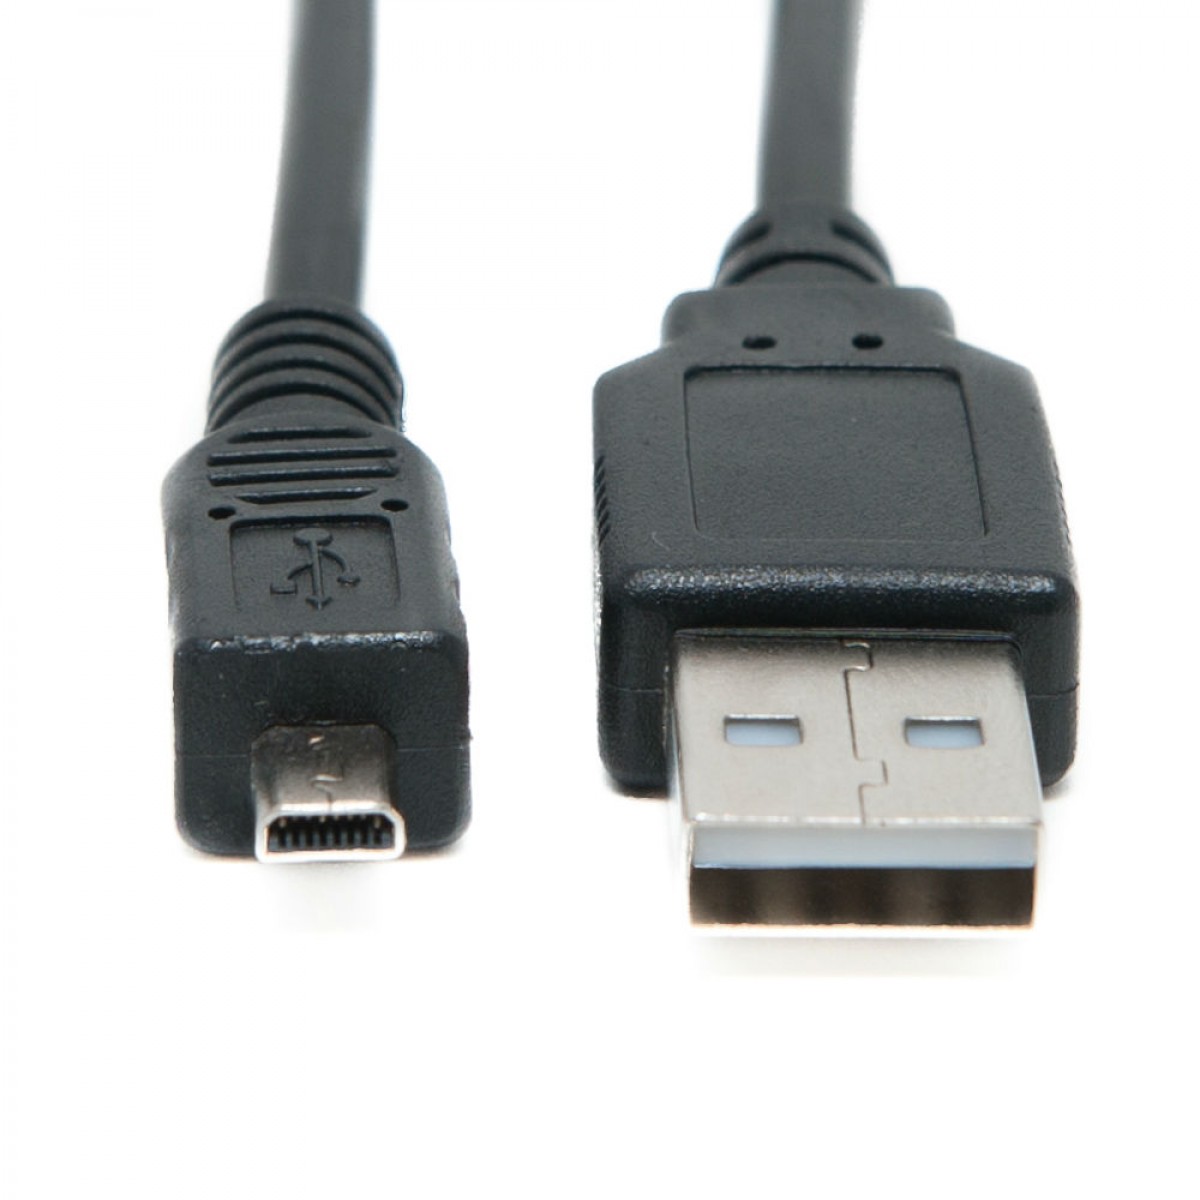 Aanval Schande Inwoner Fujifilm FinePix F20 Camera USB Cable - A Perfect Replacement for the  Original Fujifilm Digital Camera USB Cable | Keple.com